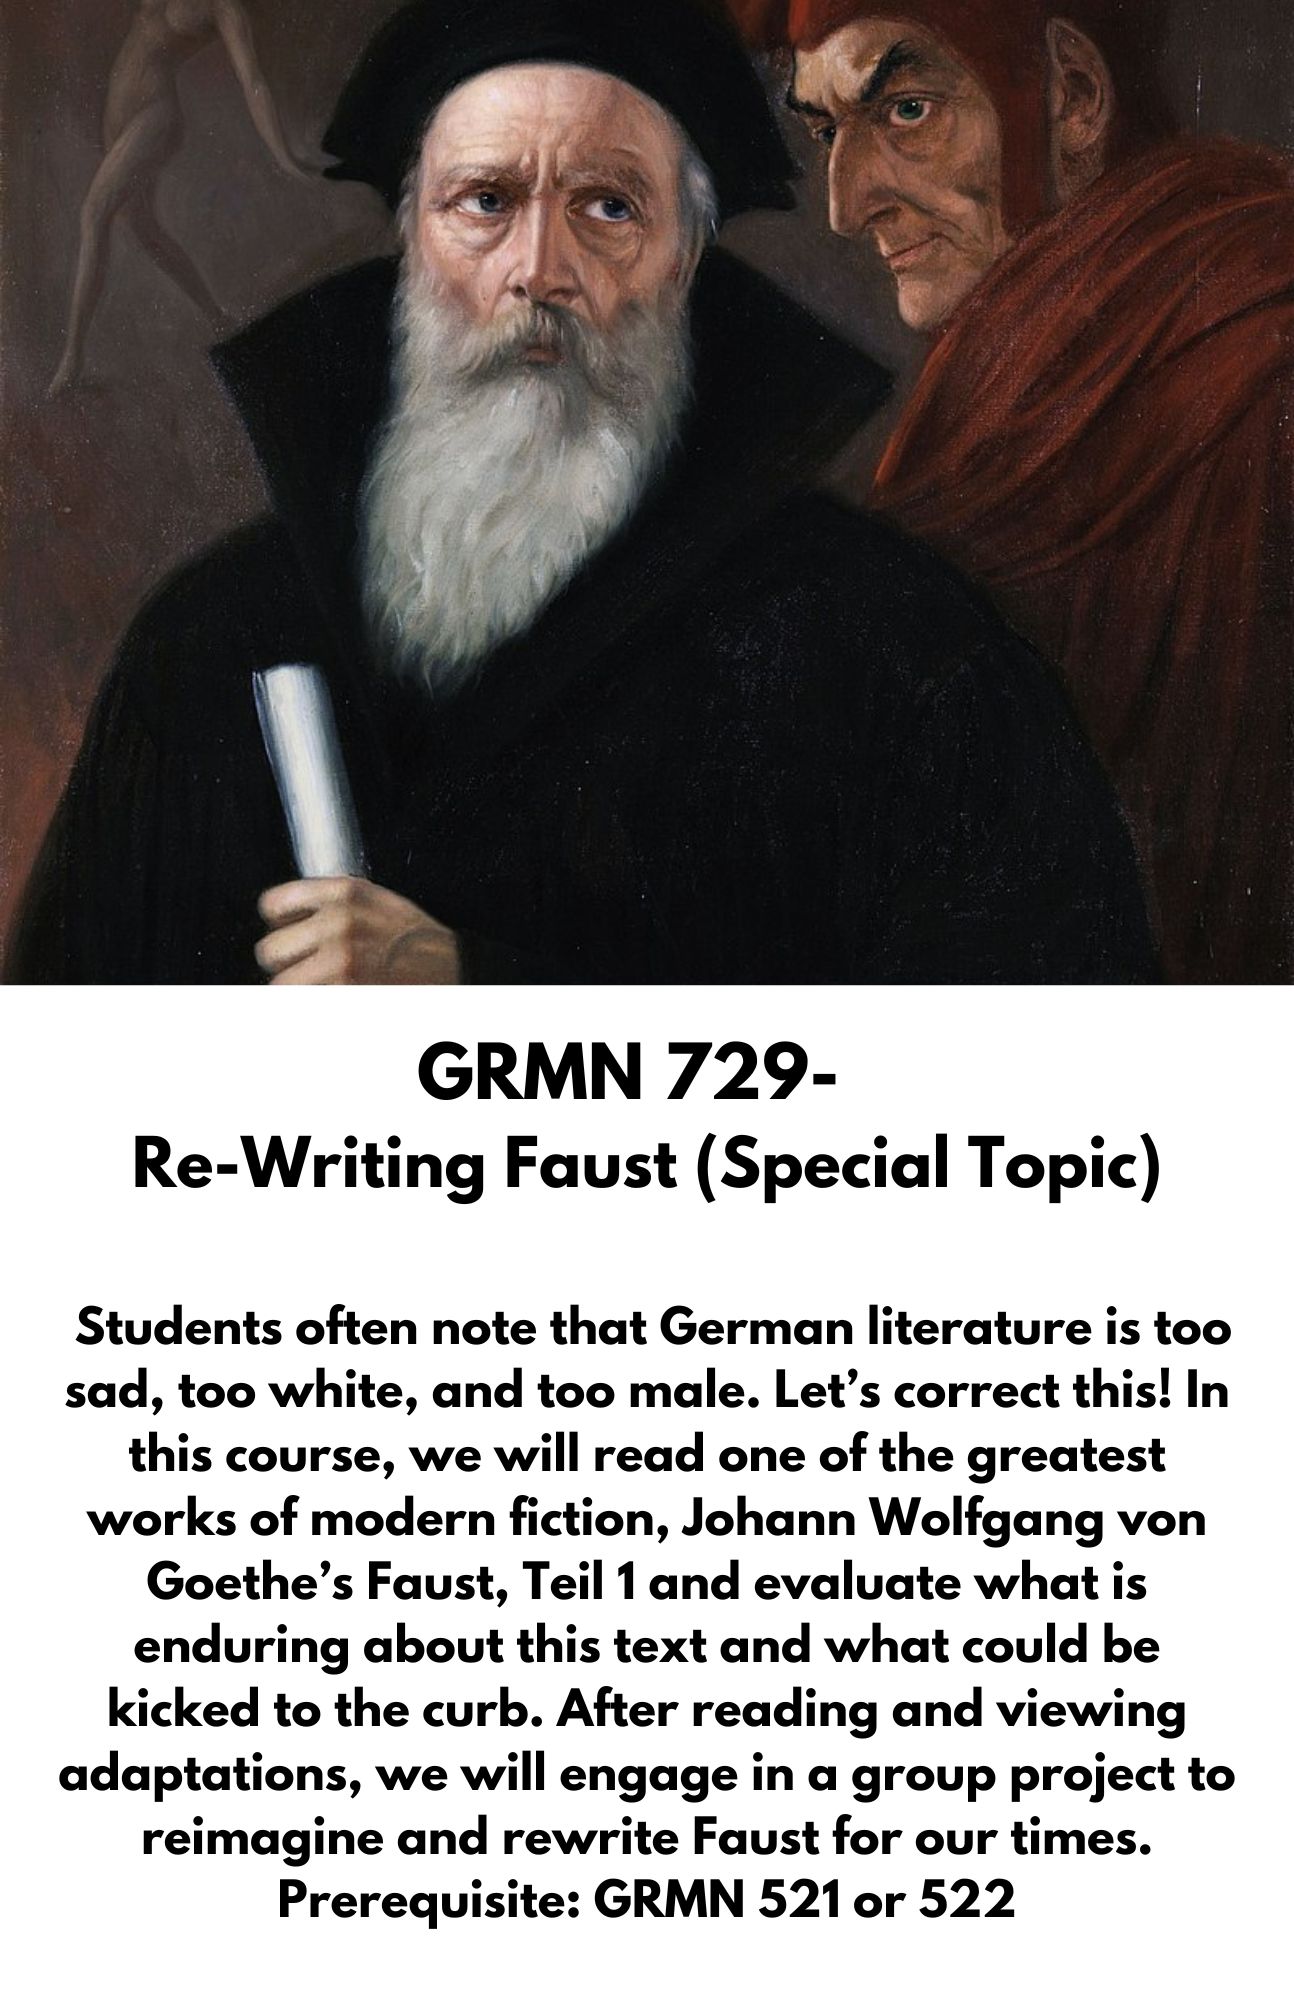 GRMN 729-   Re-Writing Faust (Special Topic)   Students often note that German literature is too sad, too white, and too male. Let’s correct this! In this course, we will read one of the greatest works of modern fiction, Johann Wolfgang von Goethe’s Faust, Teil 1 and evaluate what is enduring about this text and what could be kicked to the curb. After reading and viewing adaptations, we will engage in a group project to reimagine and rewrite Faust for our times. Prerequisite: GRMN 521 or 522